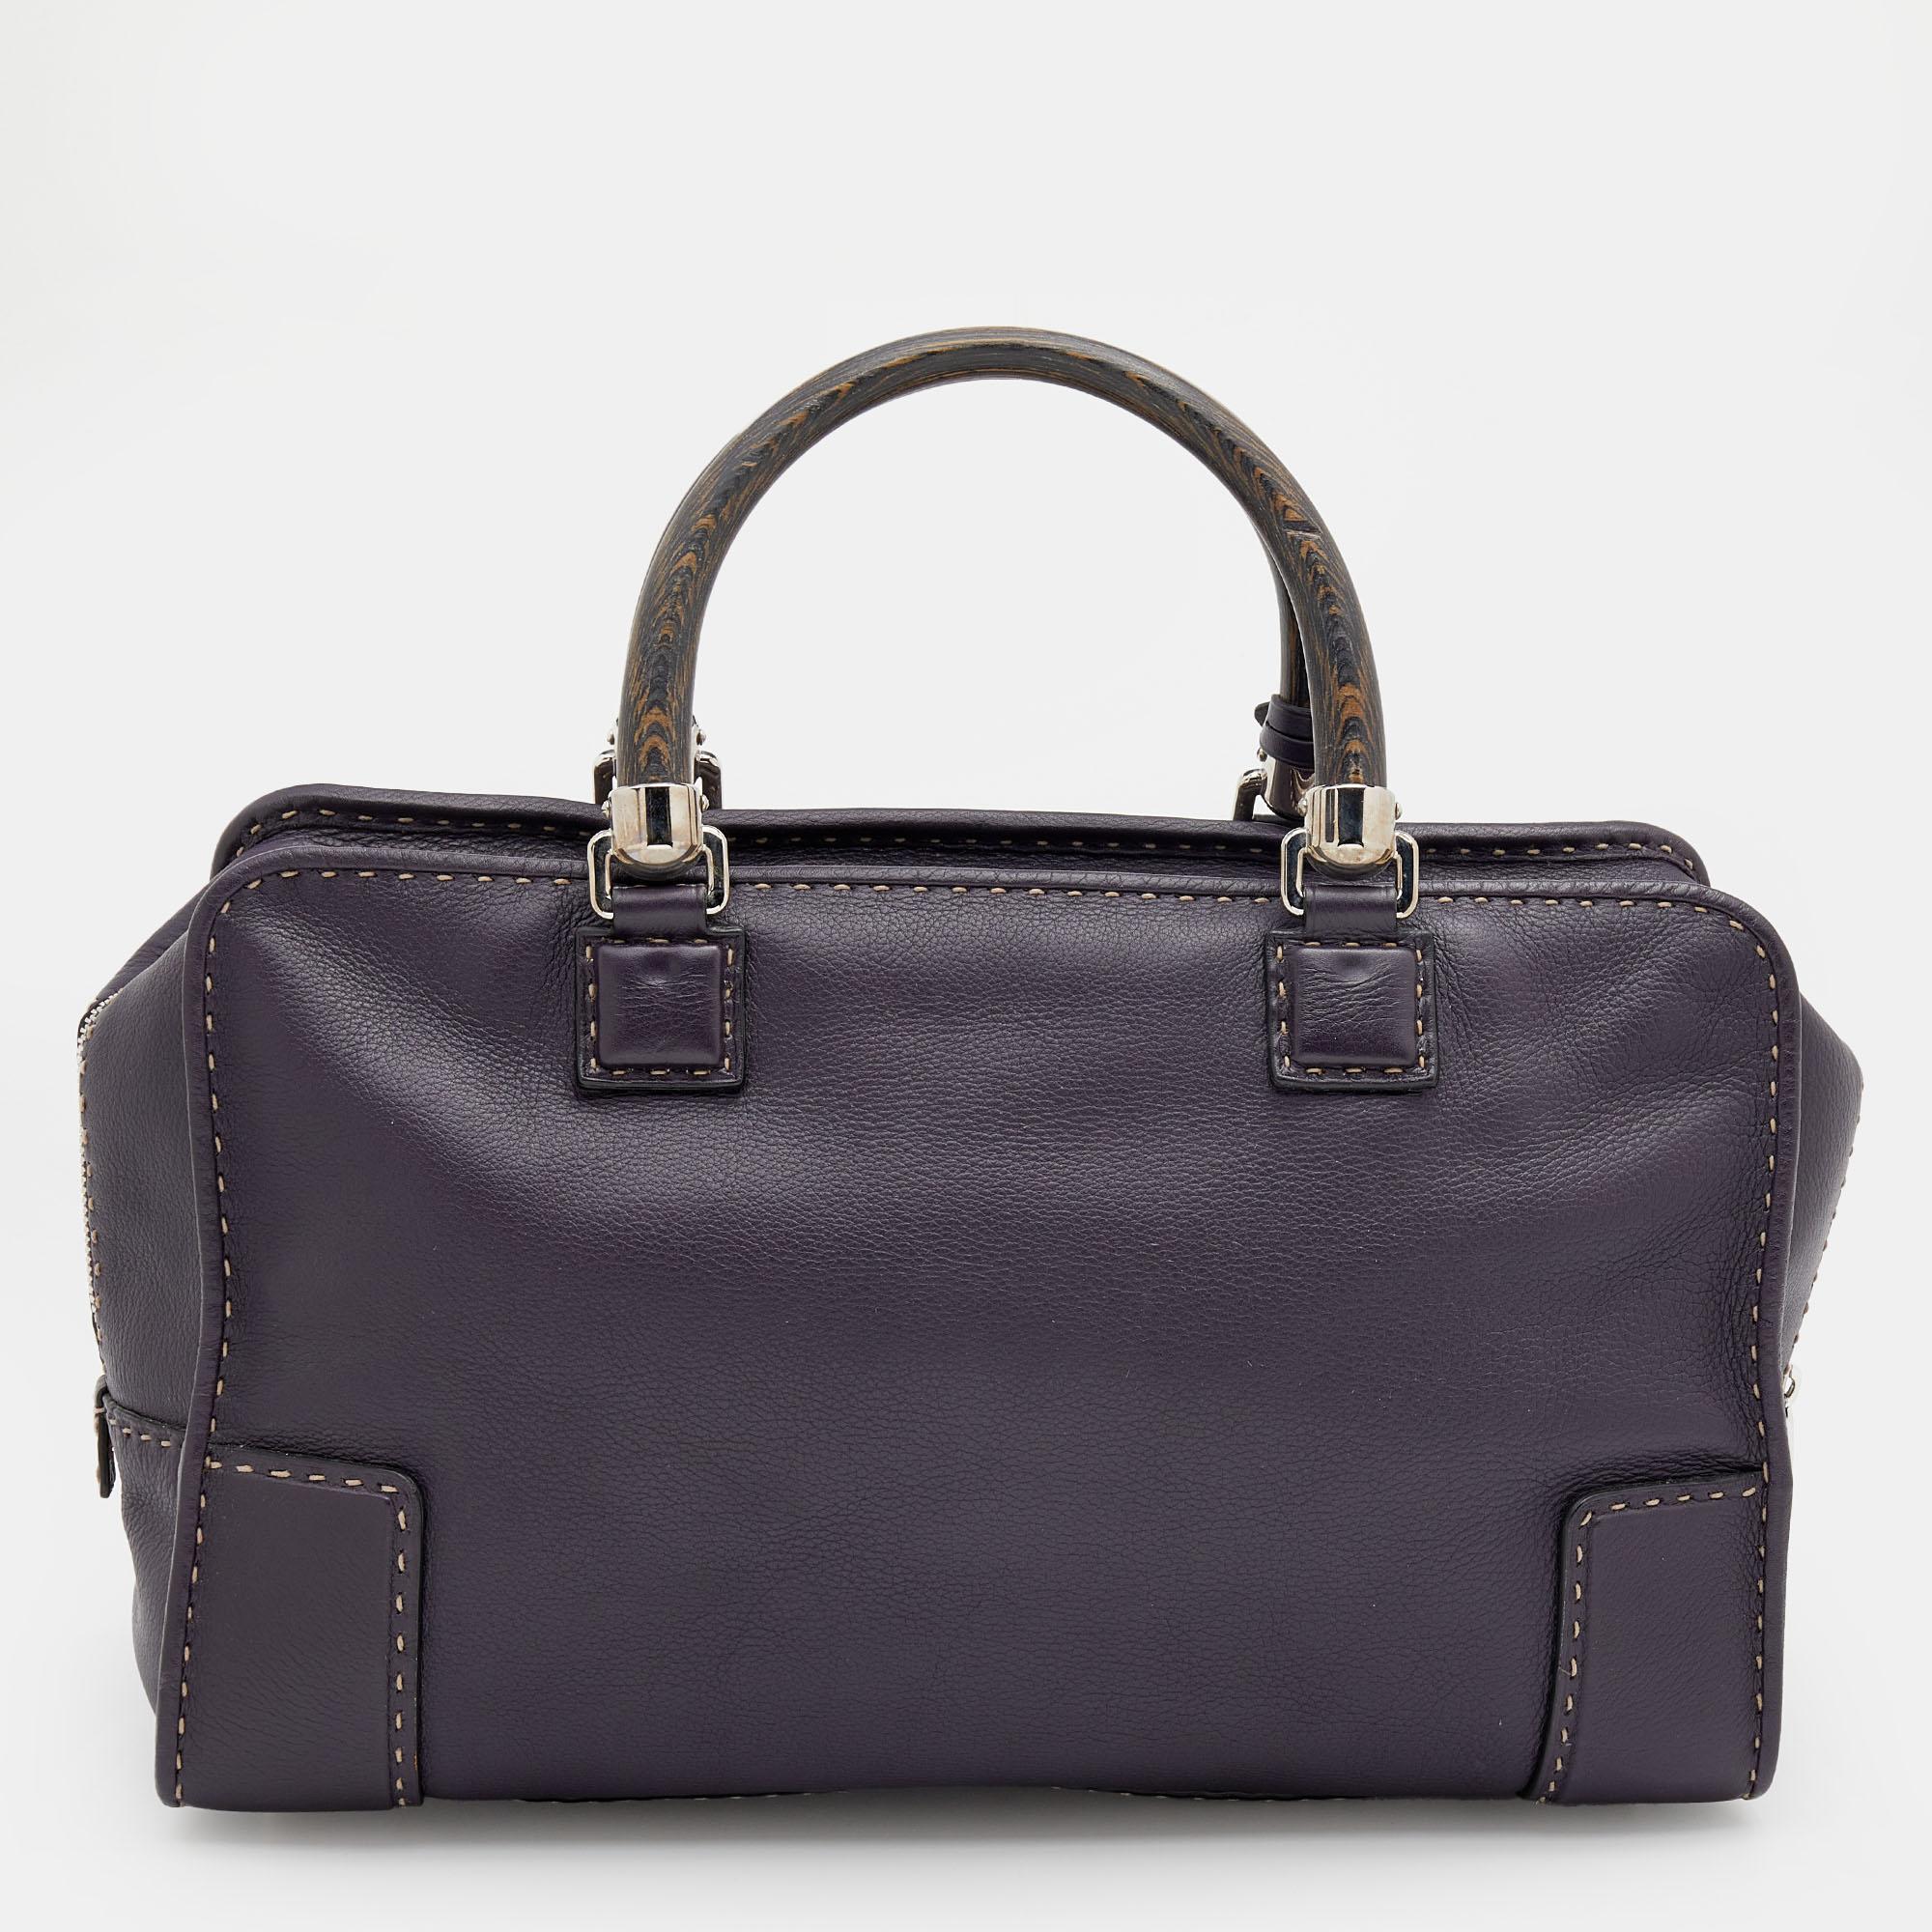 A spacious and super-chic bag that can hold more than just your essentials with ease, the Amazona is one of the most popular bags from Loewe. A must-have for women on the go, it has a functional shape. Crafted in purple leather, this bag here is